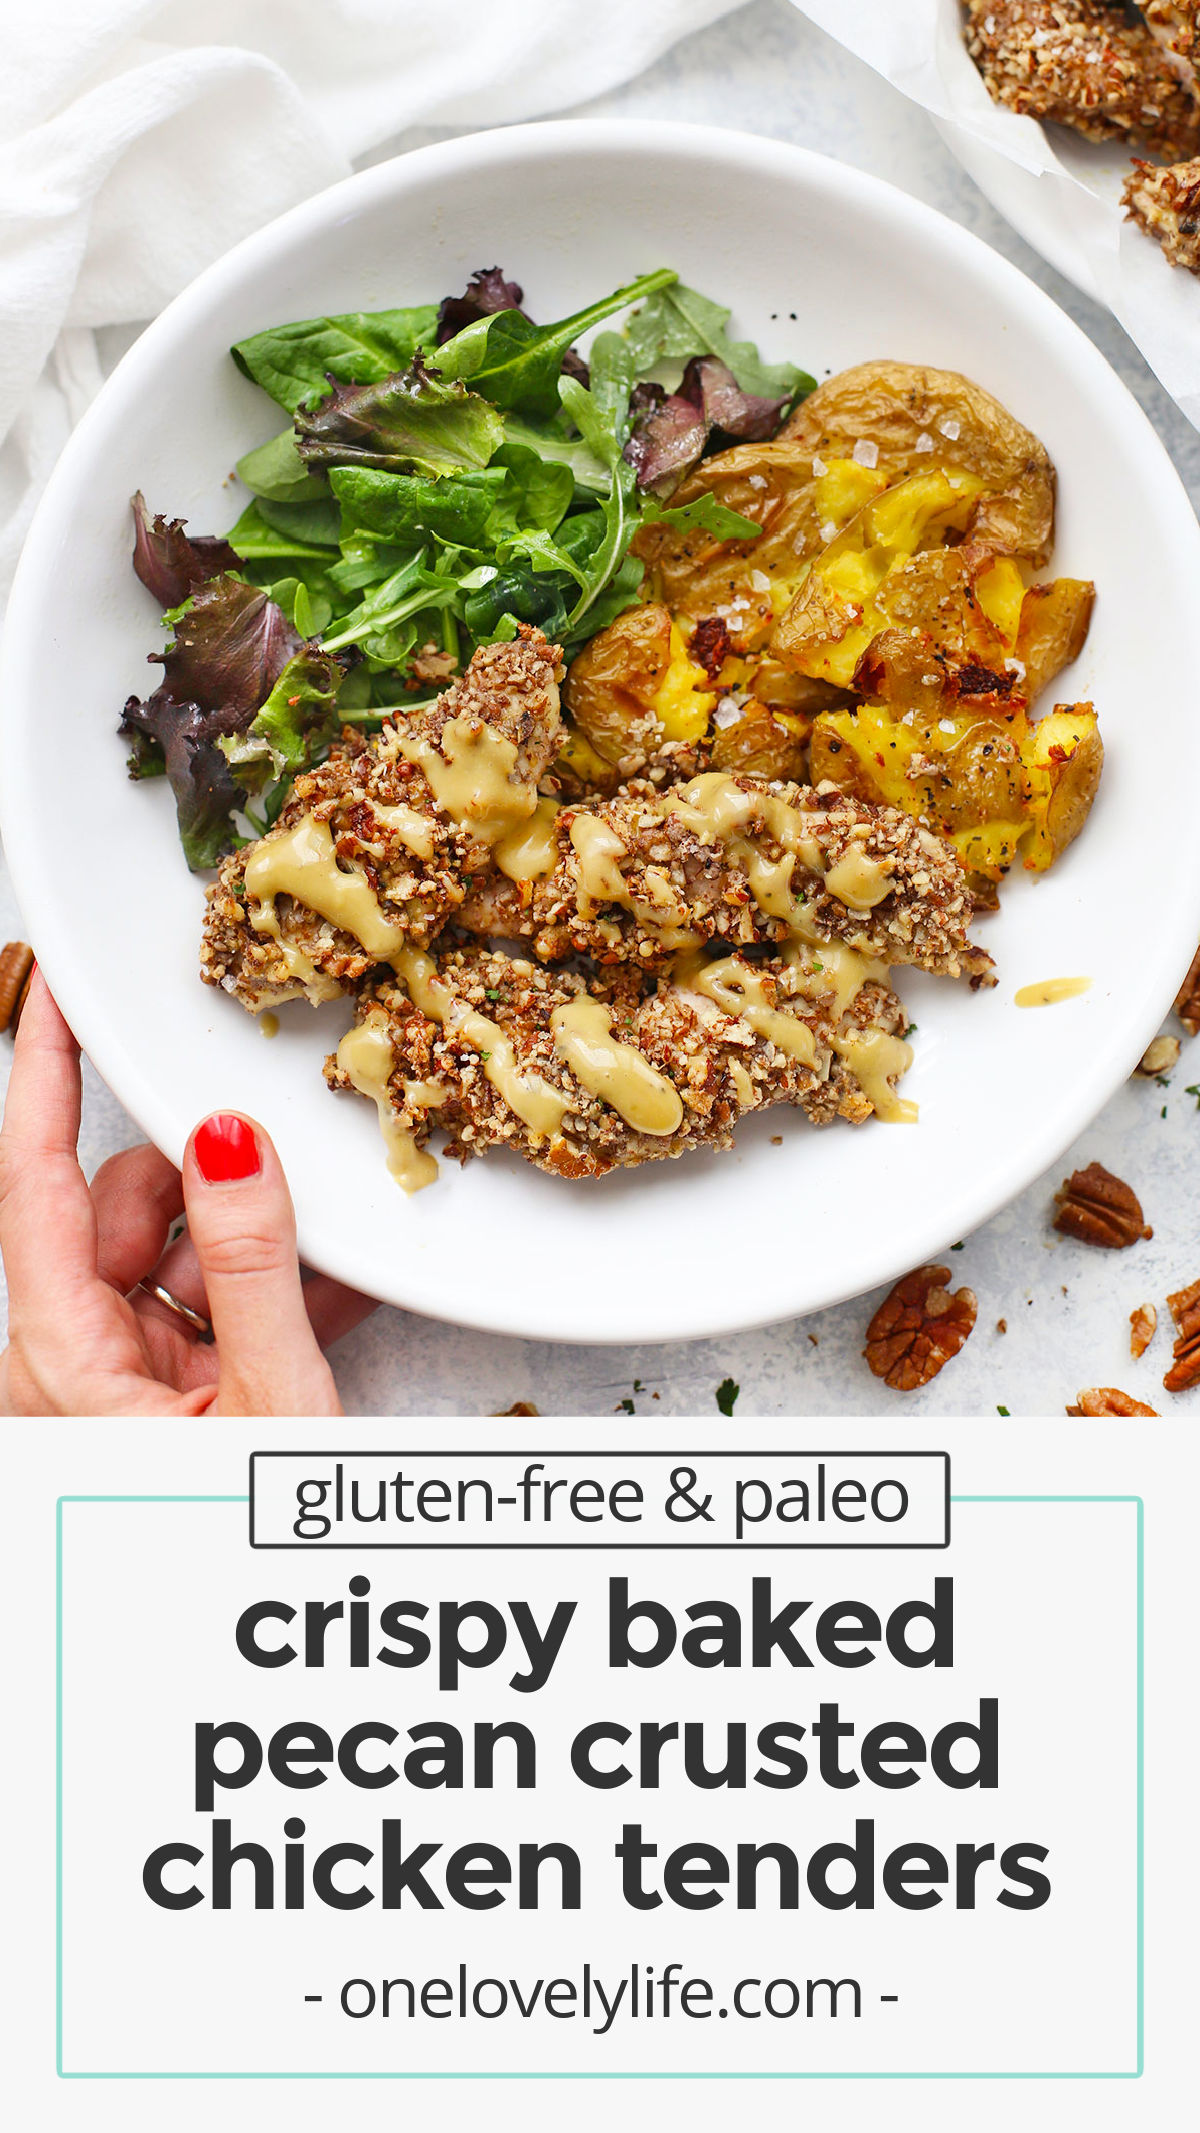 Pecan Crusted Chicken Tenders (Gluten Free, Paleo Friendly) - Savory chicken tenders with a crunchy pecan coating. Quick, easy & yummy! // Pecan Chicken Tenders // paleo pecan chicken tenders // healthy pecan chicken tenders // healthy chicken tenders // easy chicken recipe // paleo dinner // chicken tenders recipe // gluten free pecan chicken tenders